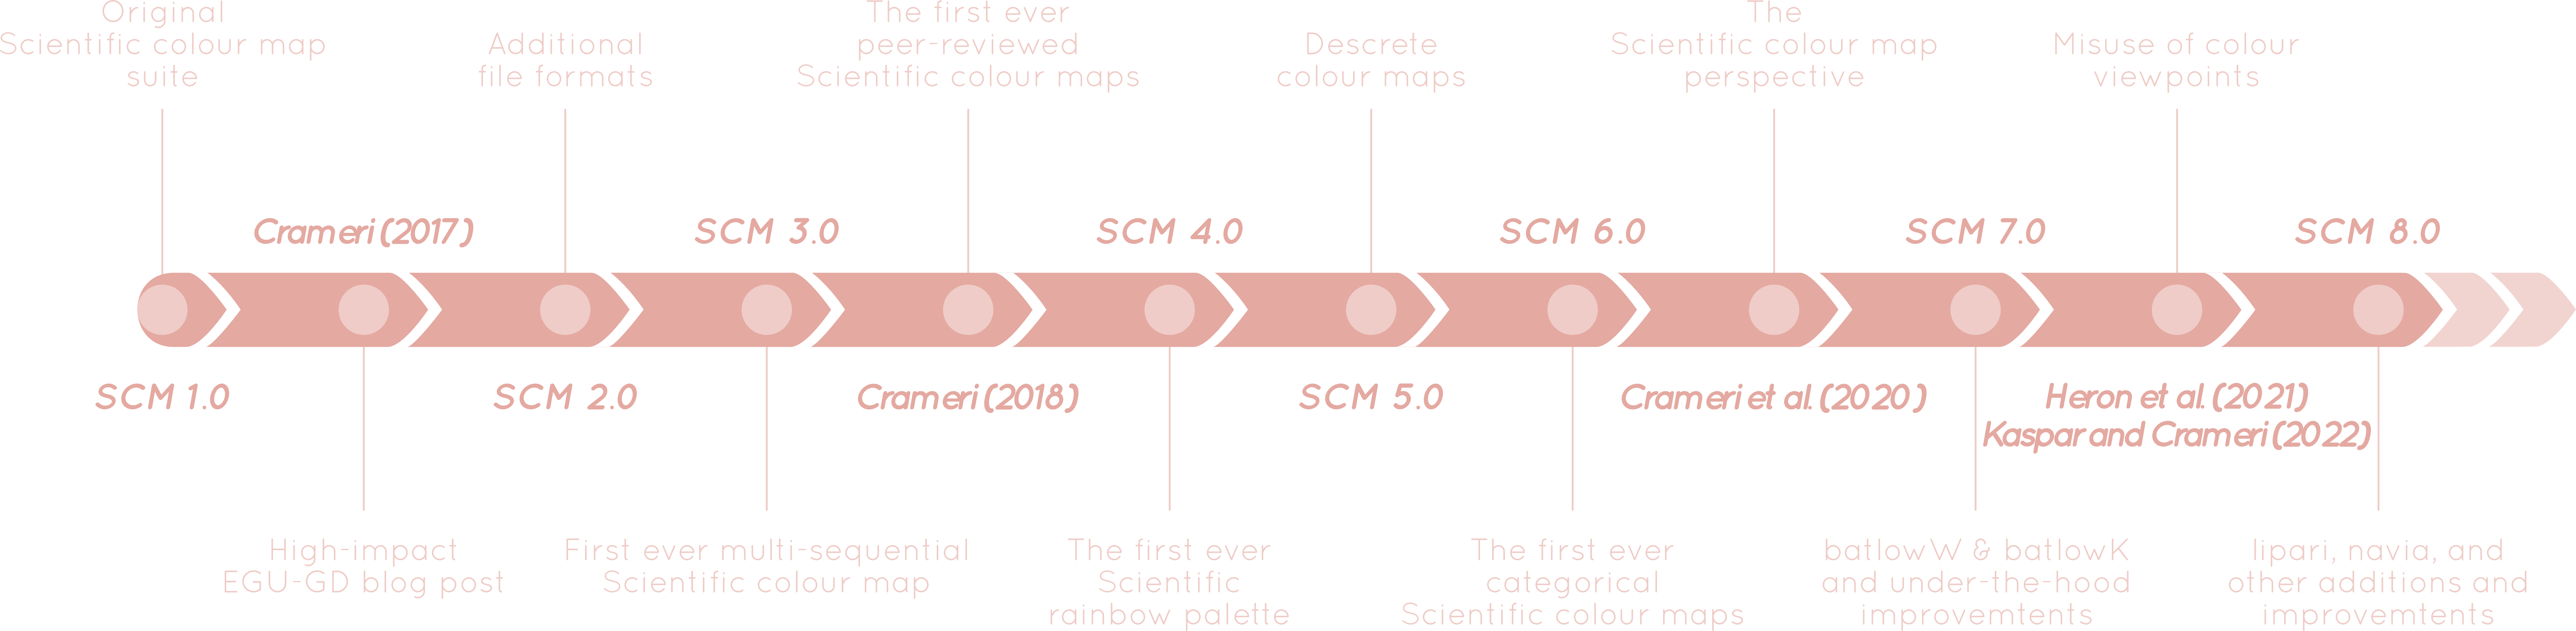 Timeline of the Scientific colour map initiative (#UseBatlow).